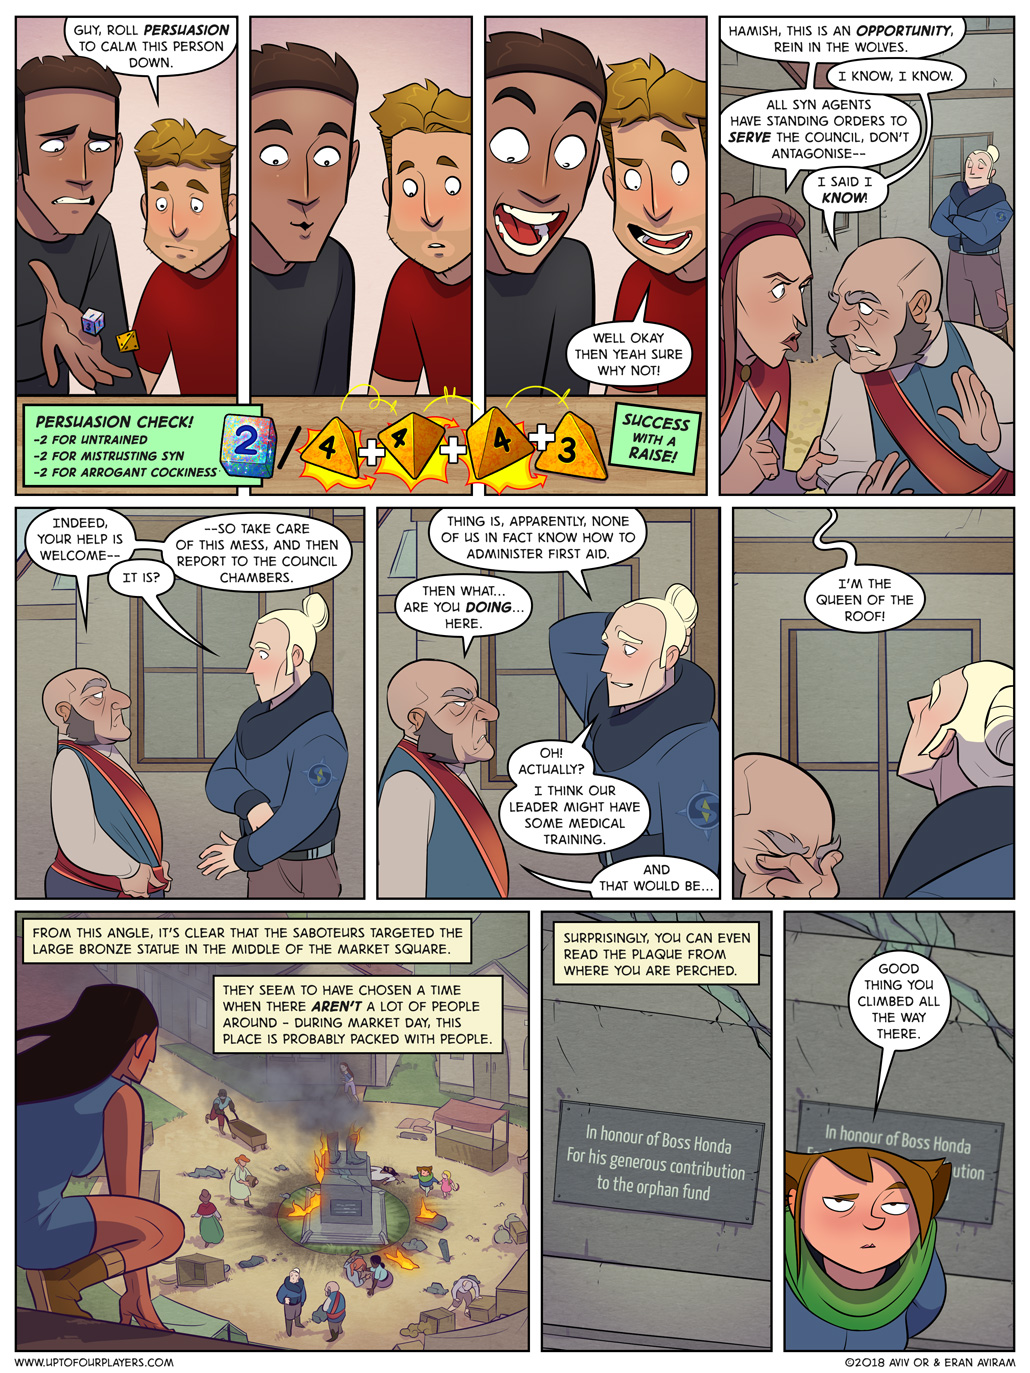 Heart of Stone – Page 6